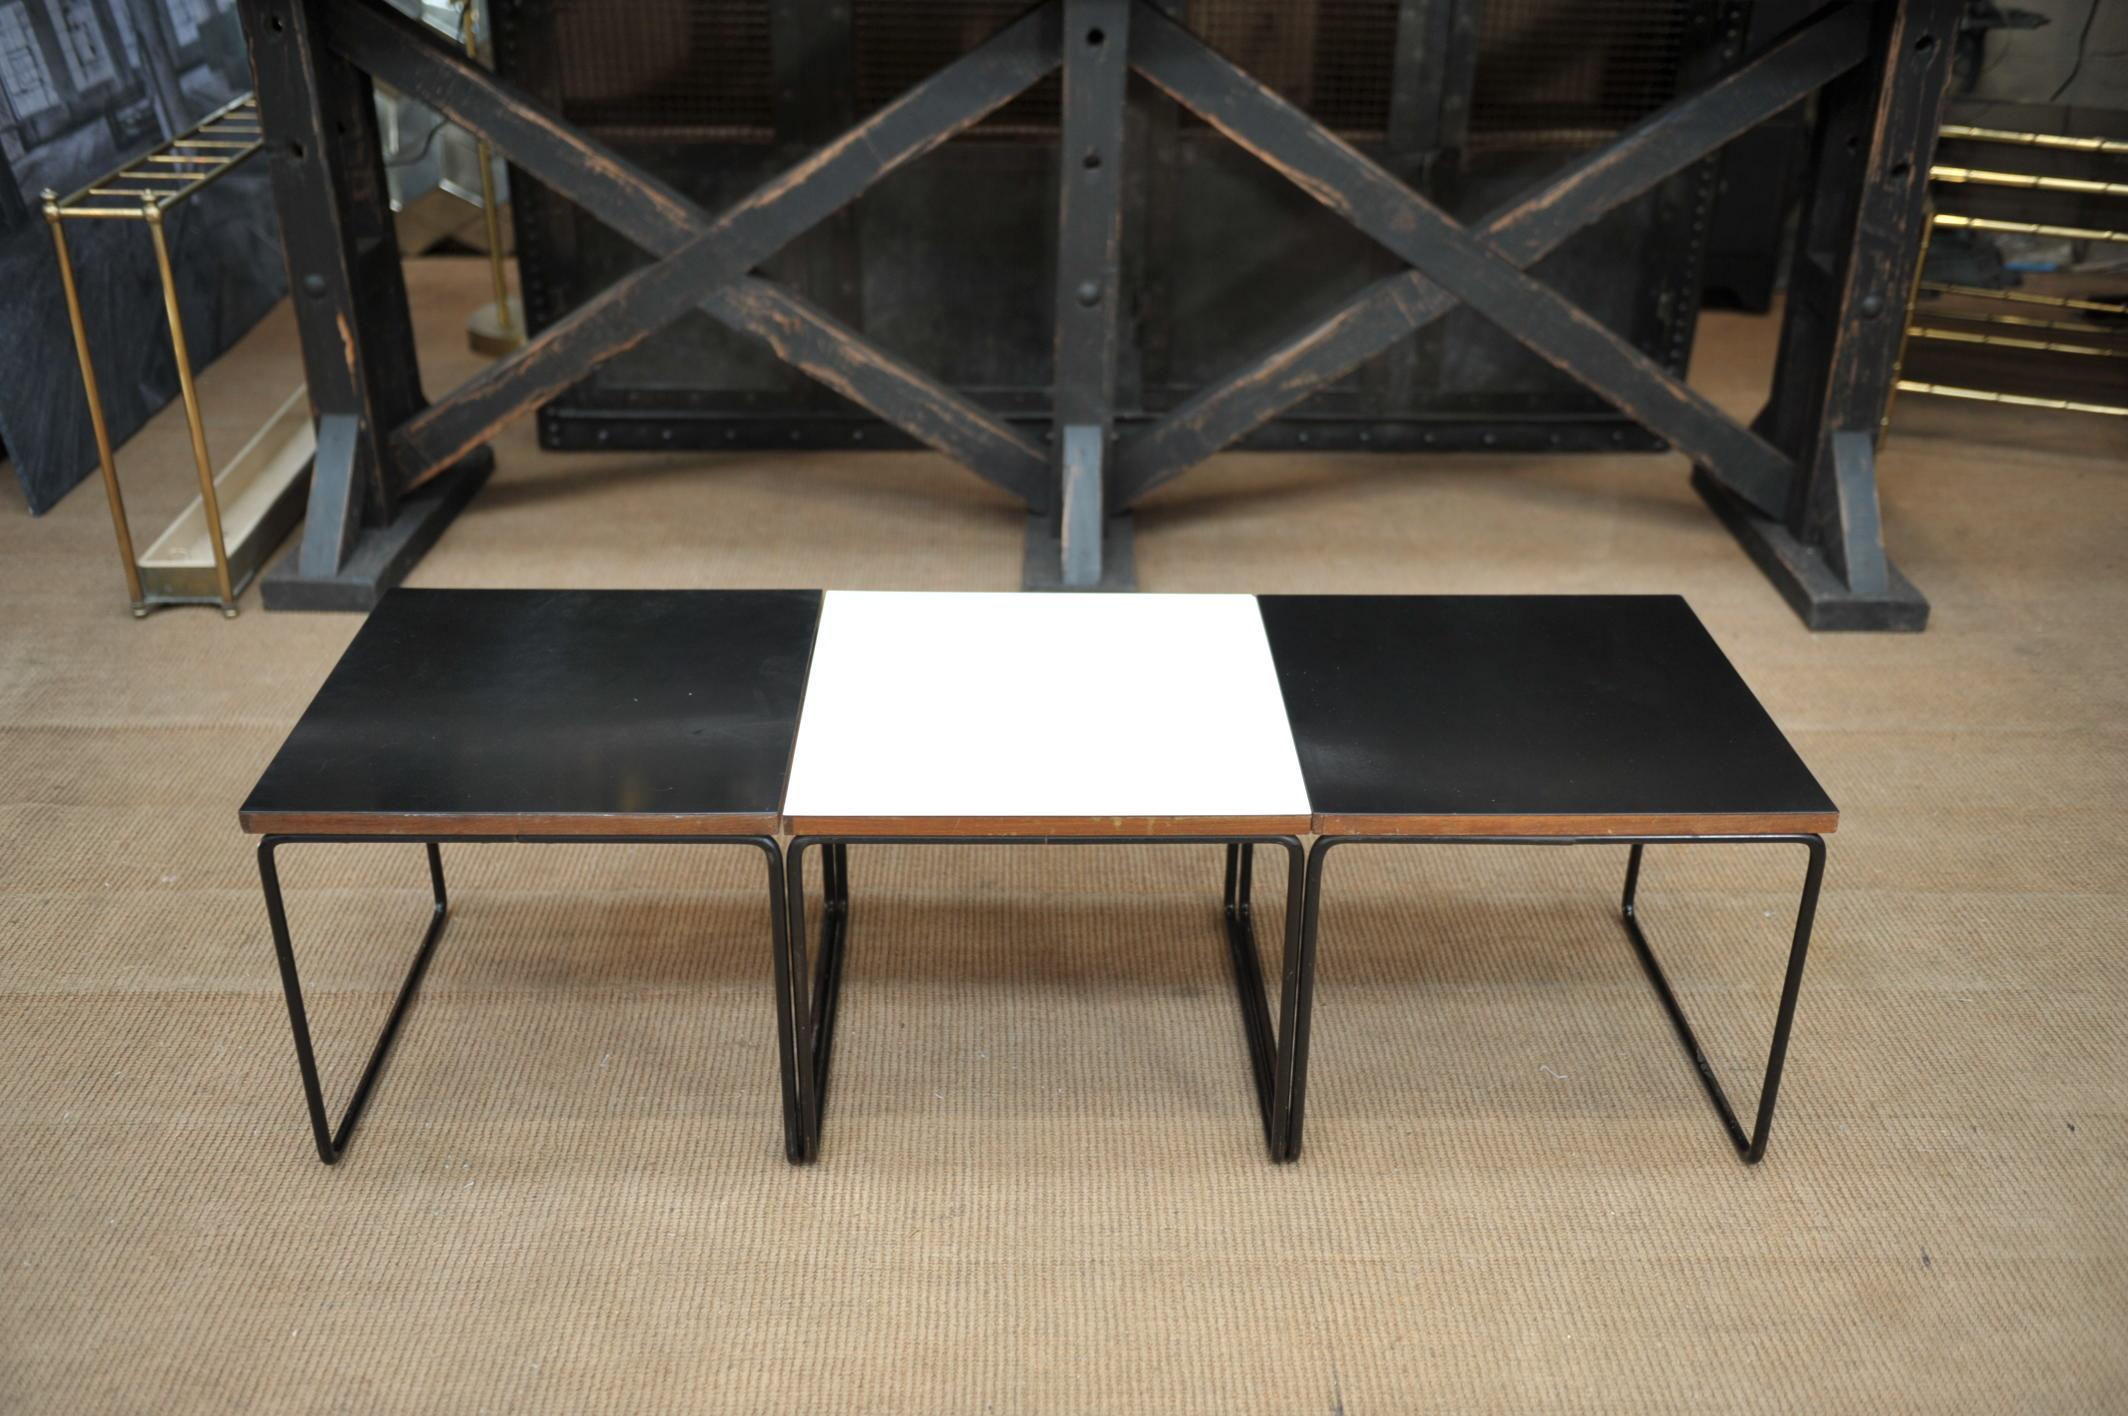 Mid-20th Century Set of 3 Coffee Table by Pierre Guariche for Steiner, France, circa 1950